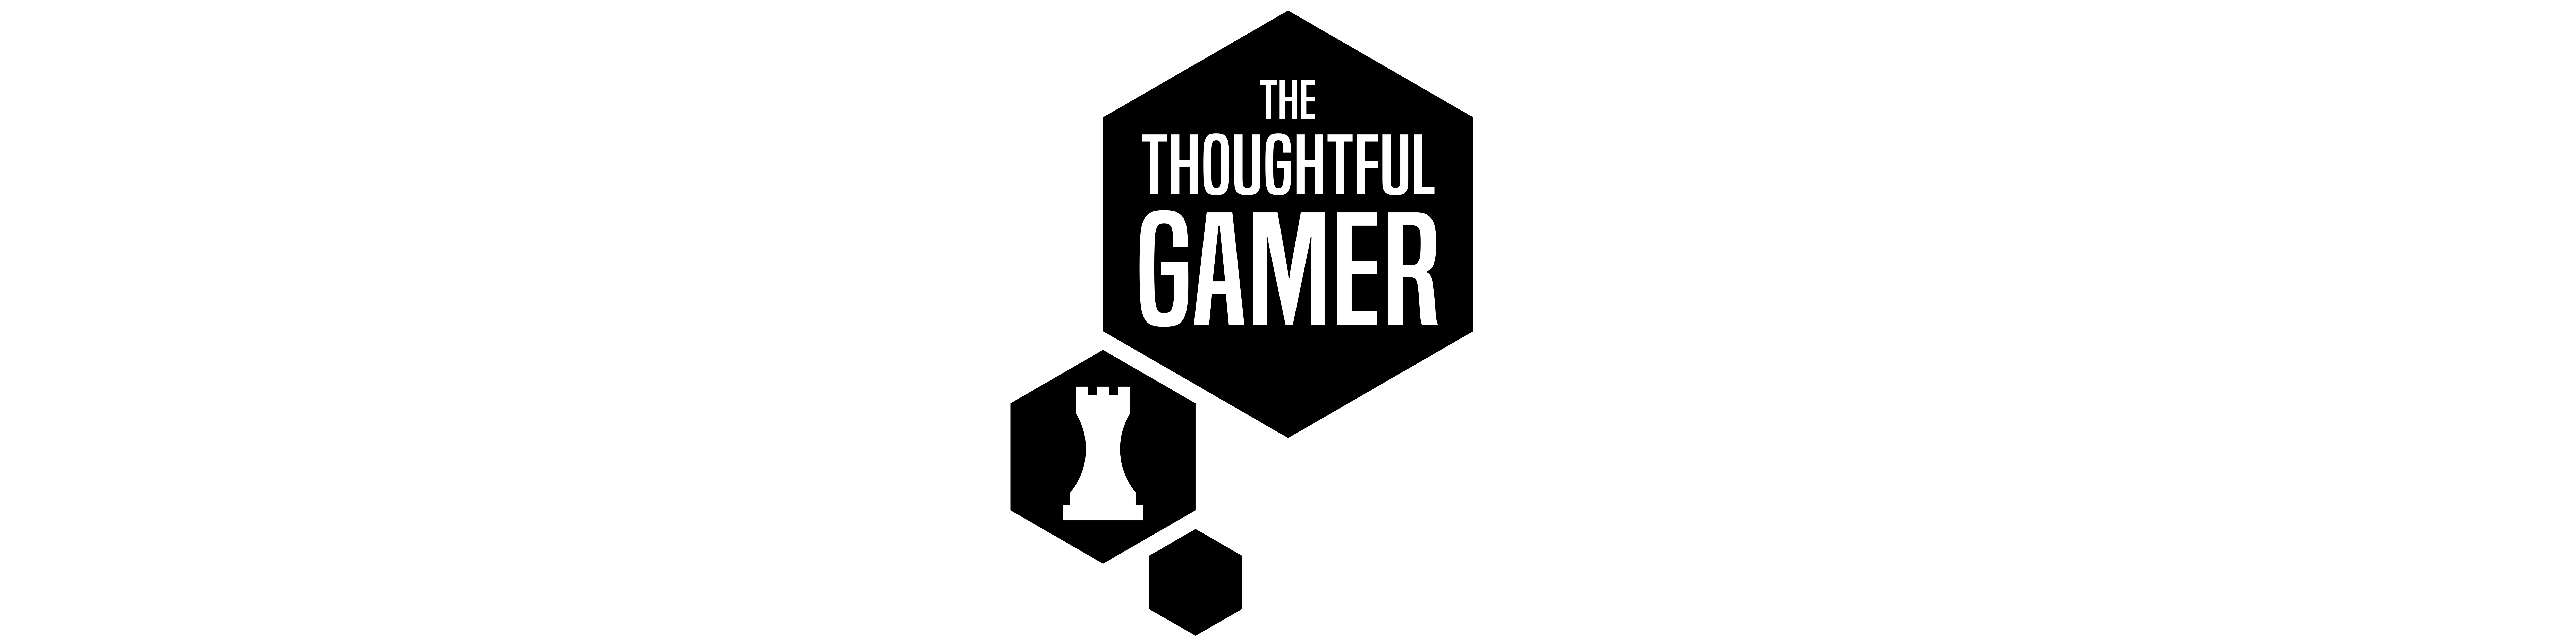 The Thoughtful Gamer Podcast header image 1